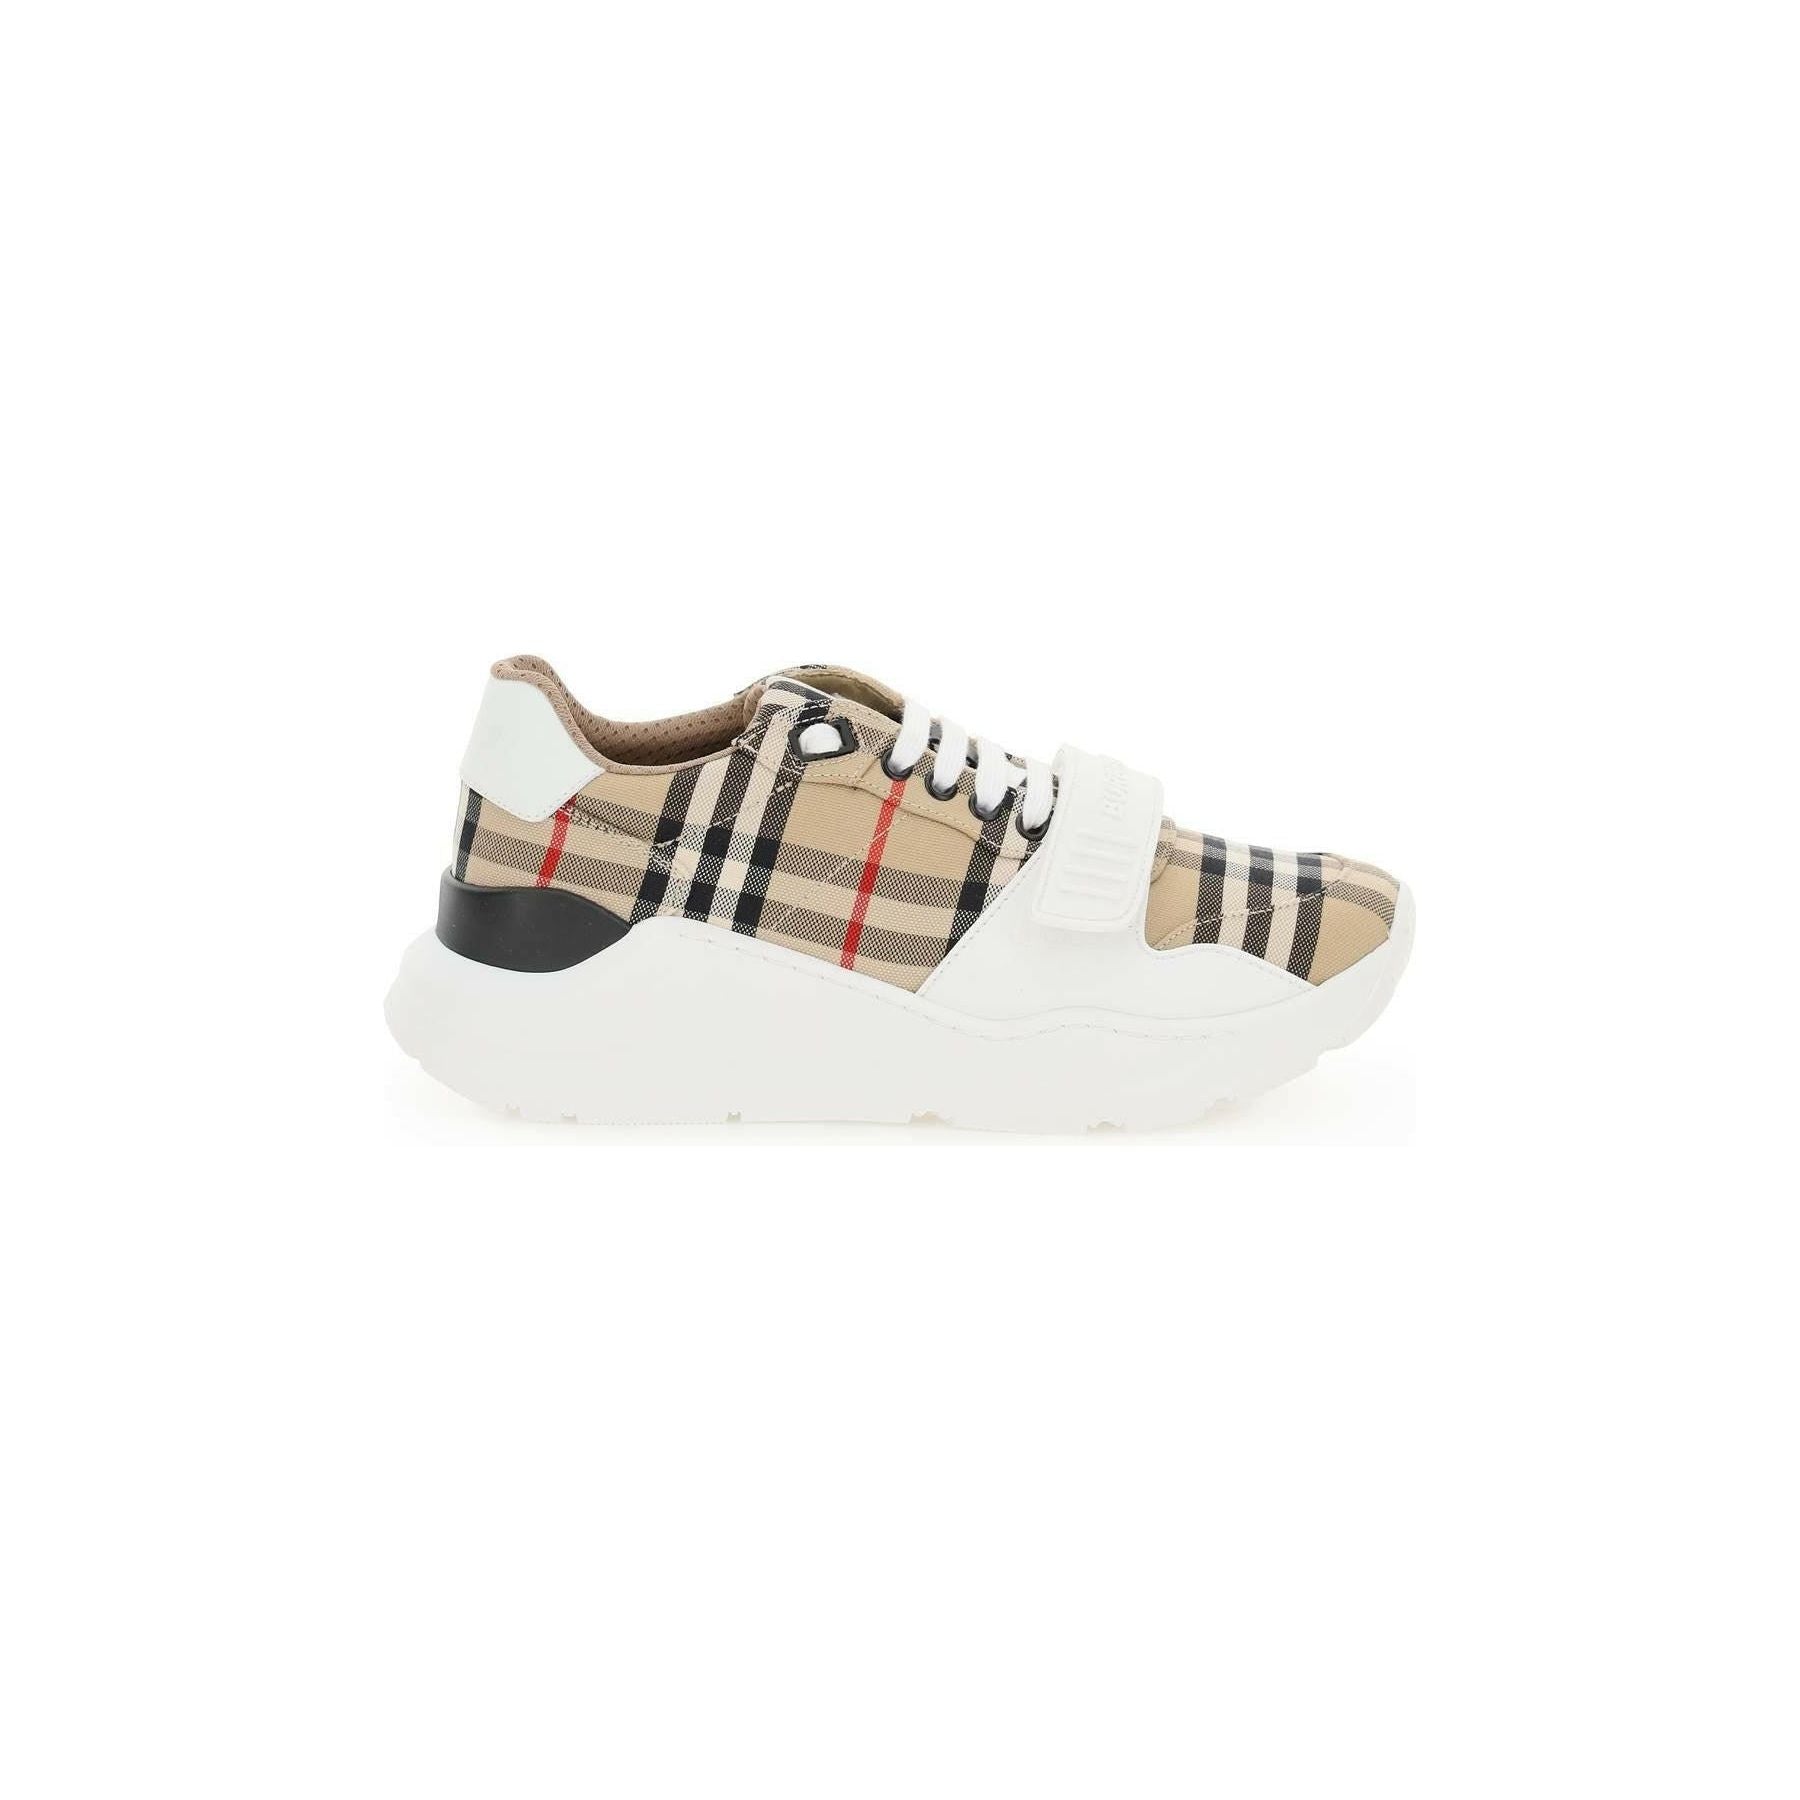 Archive Beige Regis Check, Suede and Leather Sneakers BURBERRY JOHN JULIA.